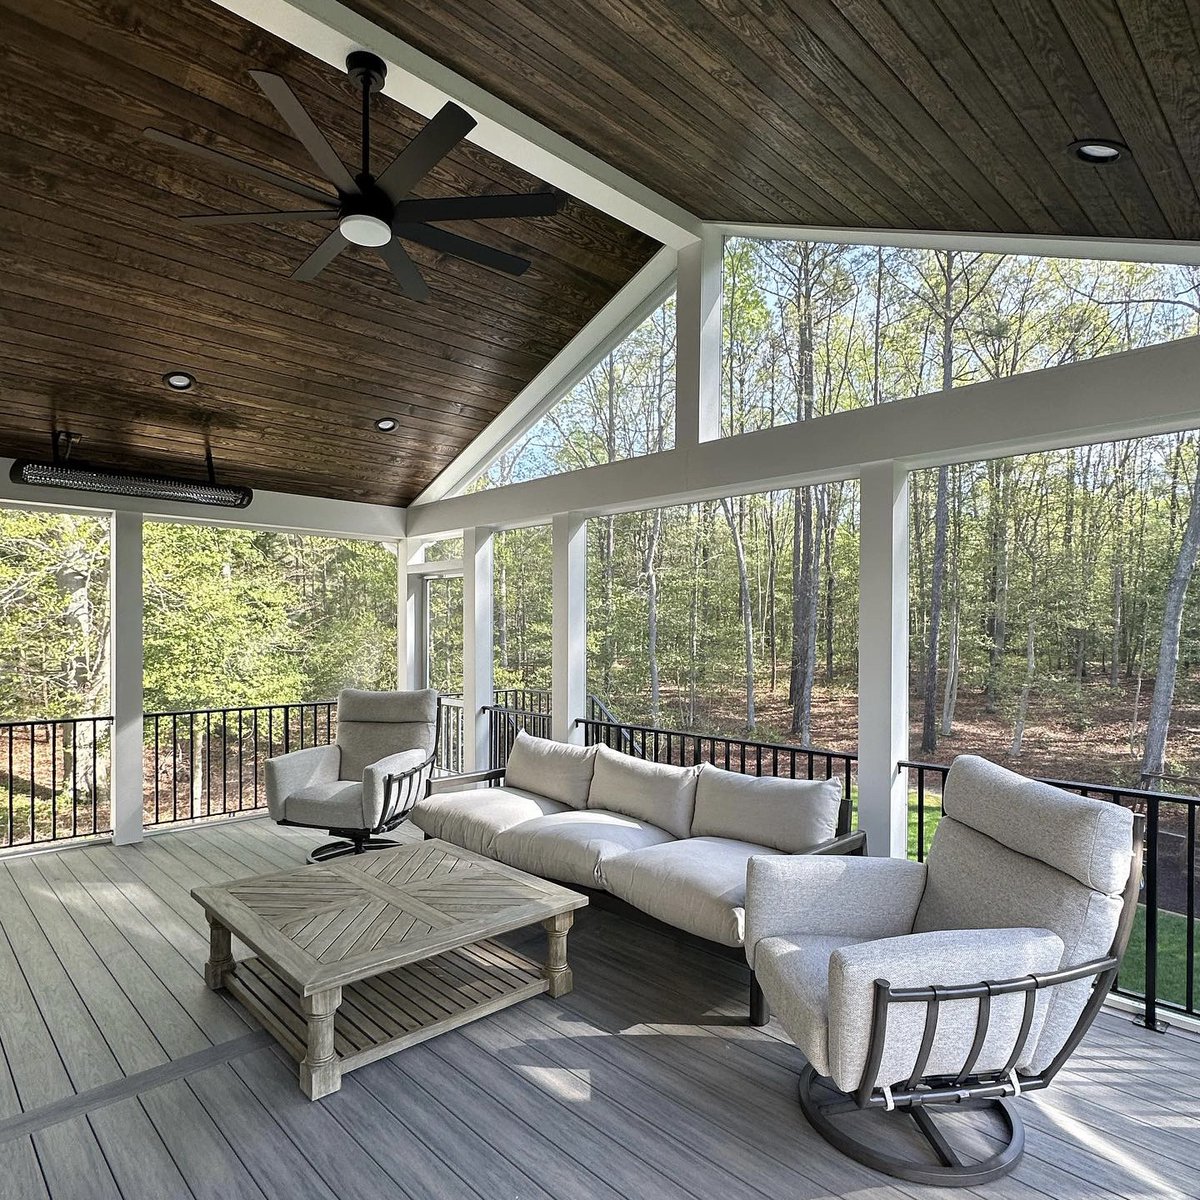 Lester Contracting LLC finished this gorgeous screened porch in VA! ☀️🪛 The sunlit, spacious area is an ideal spot for family gatherings. Excellent work! 👏🏠

Swipe to see another photo. ➡️

#screeneze #porchlife #nospline #outdoorliving #spring